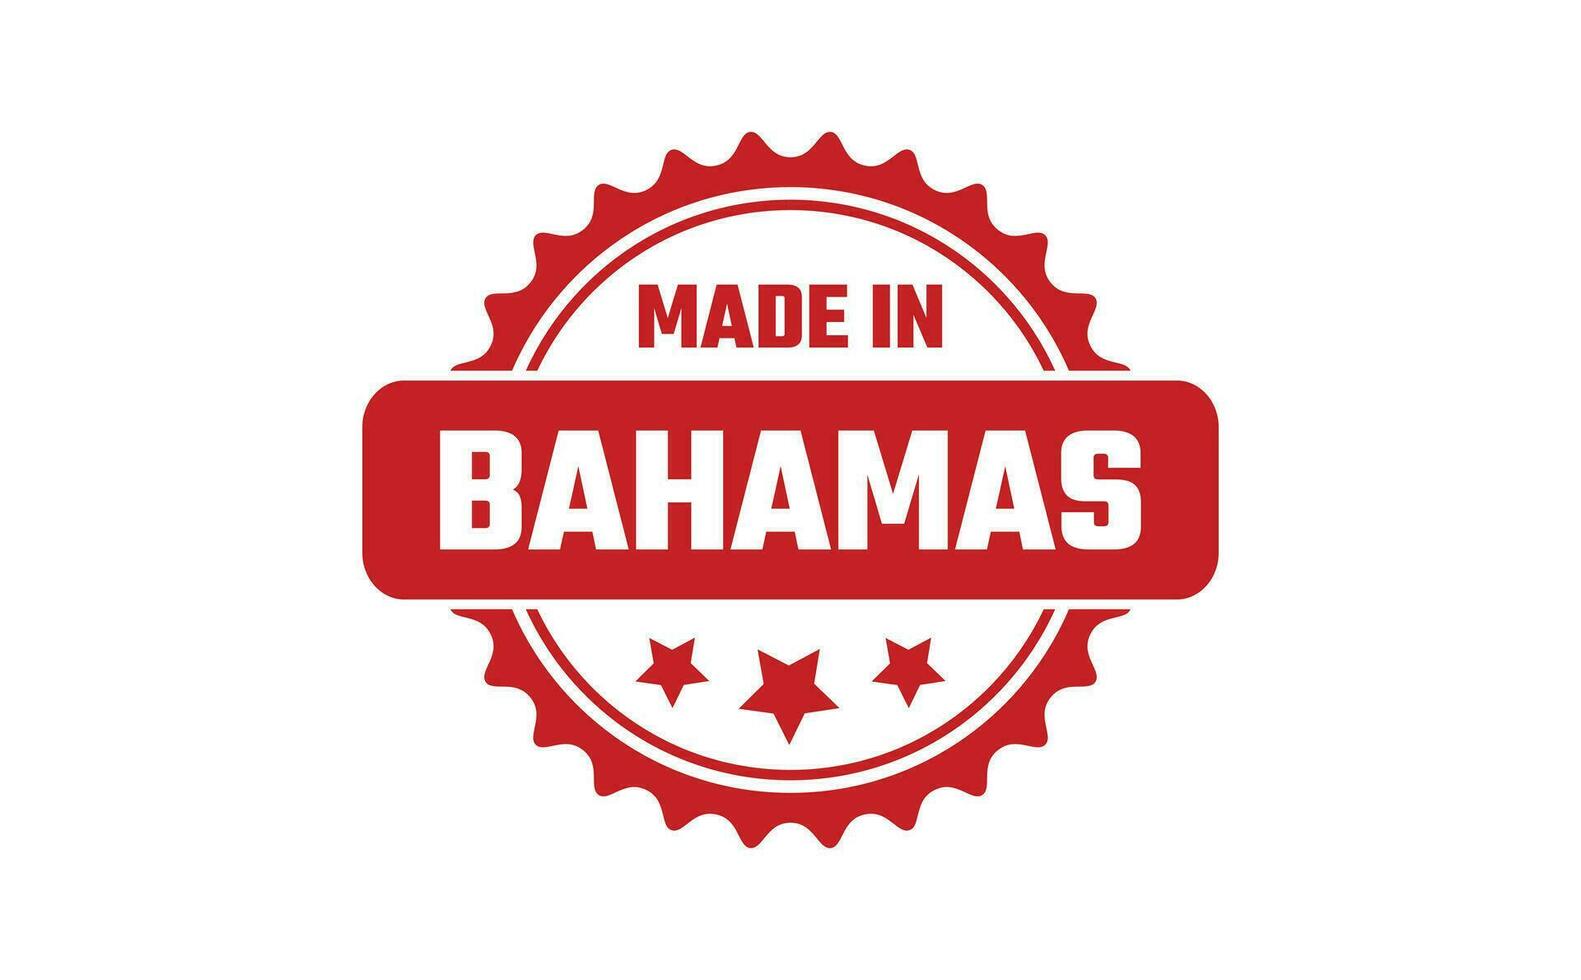 Made In Bahamas Rubber Stamp vector